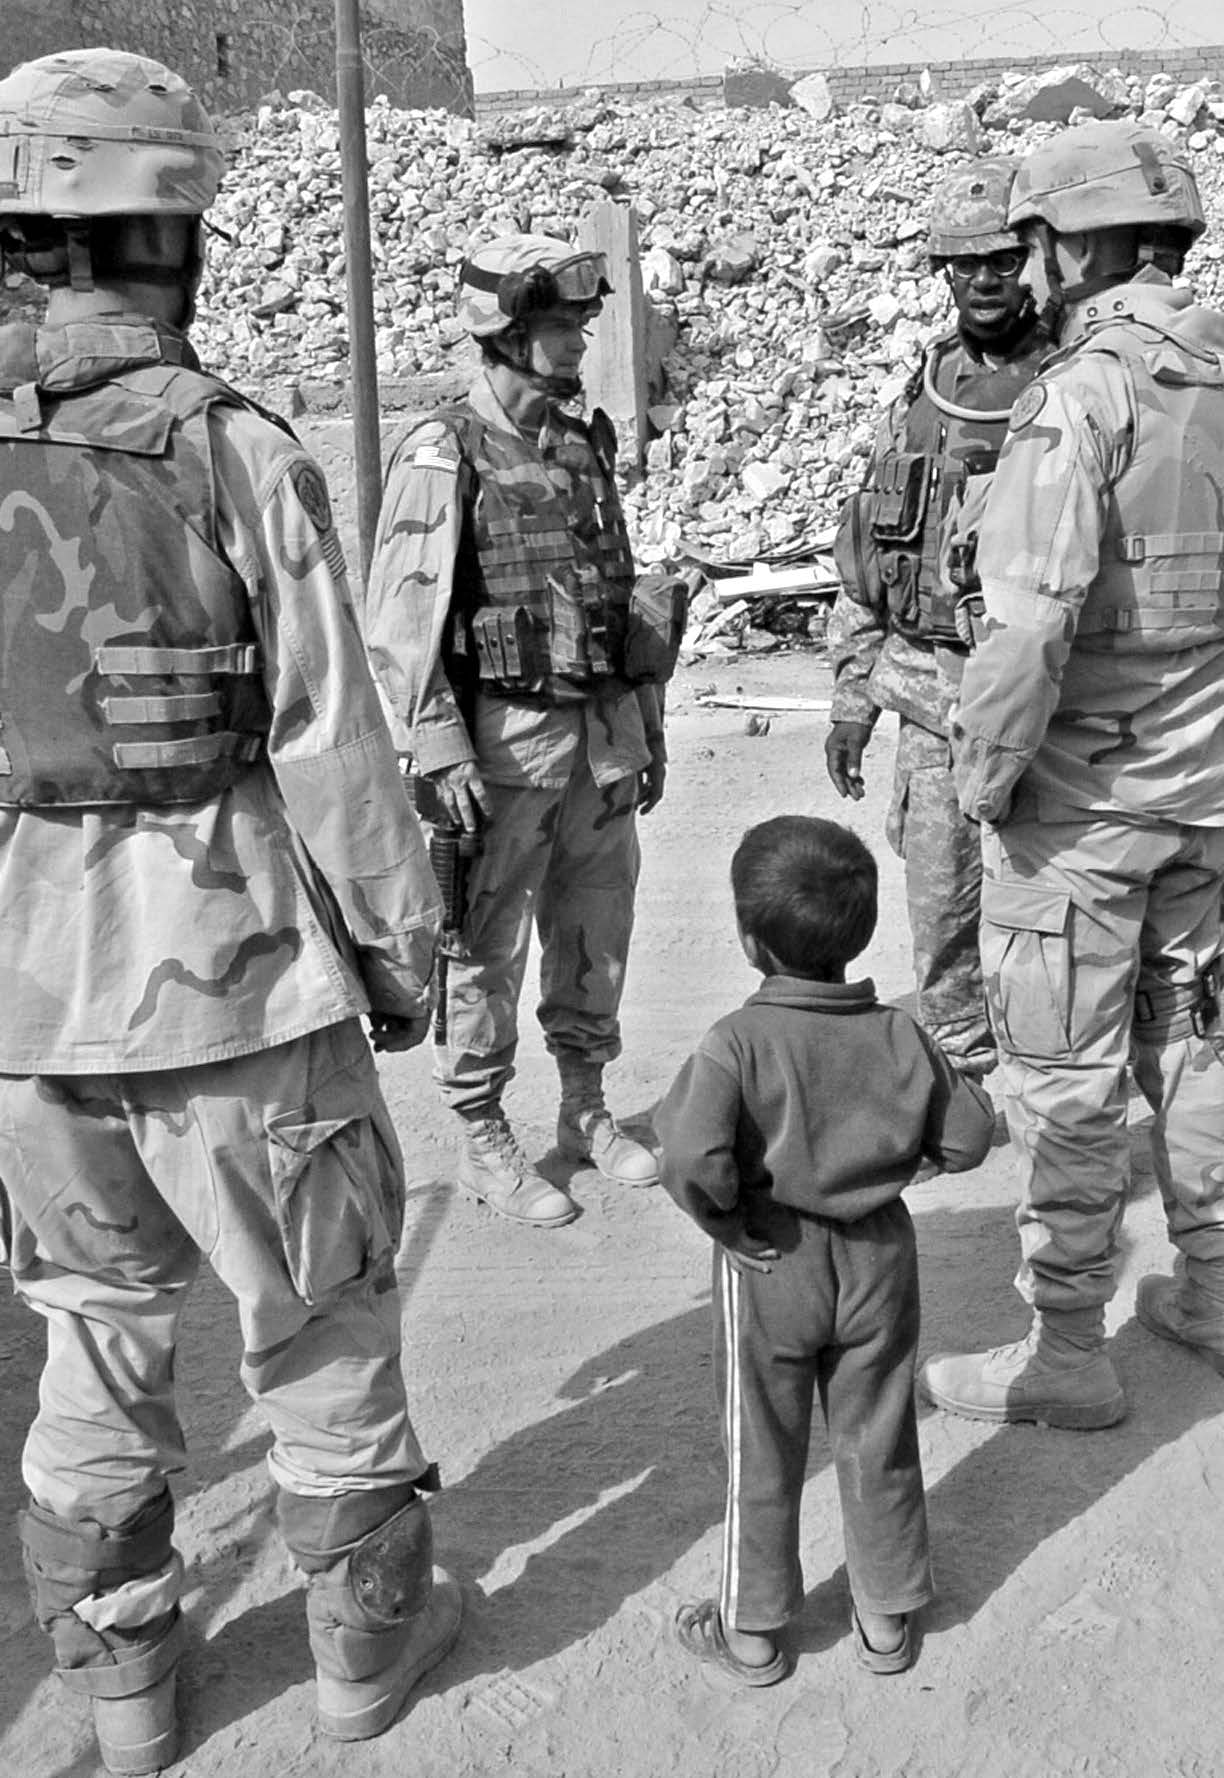 A local Iraqi boy observes U.S. Army soldiers in downtown Tall Afar, Iraq, on October 11, 2005. Courtesy of DoD.